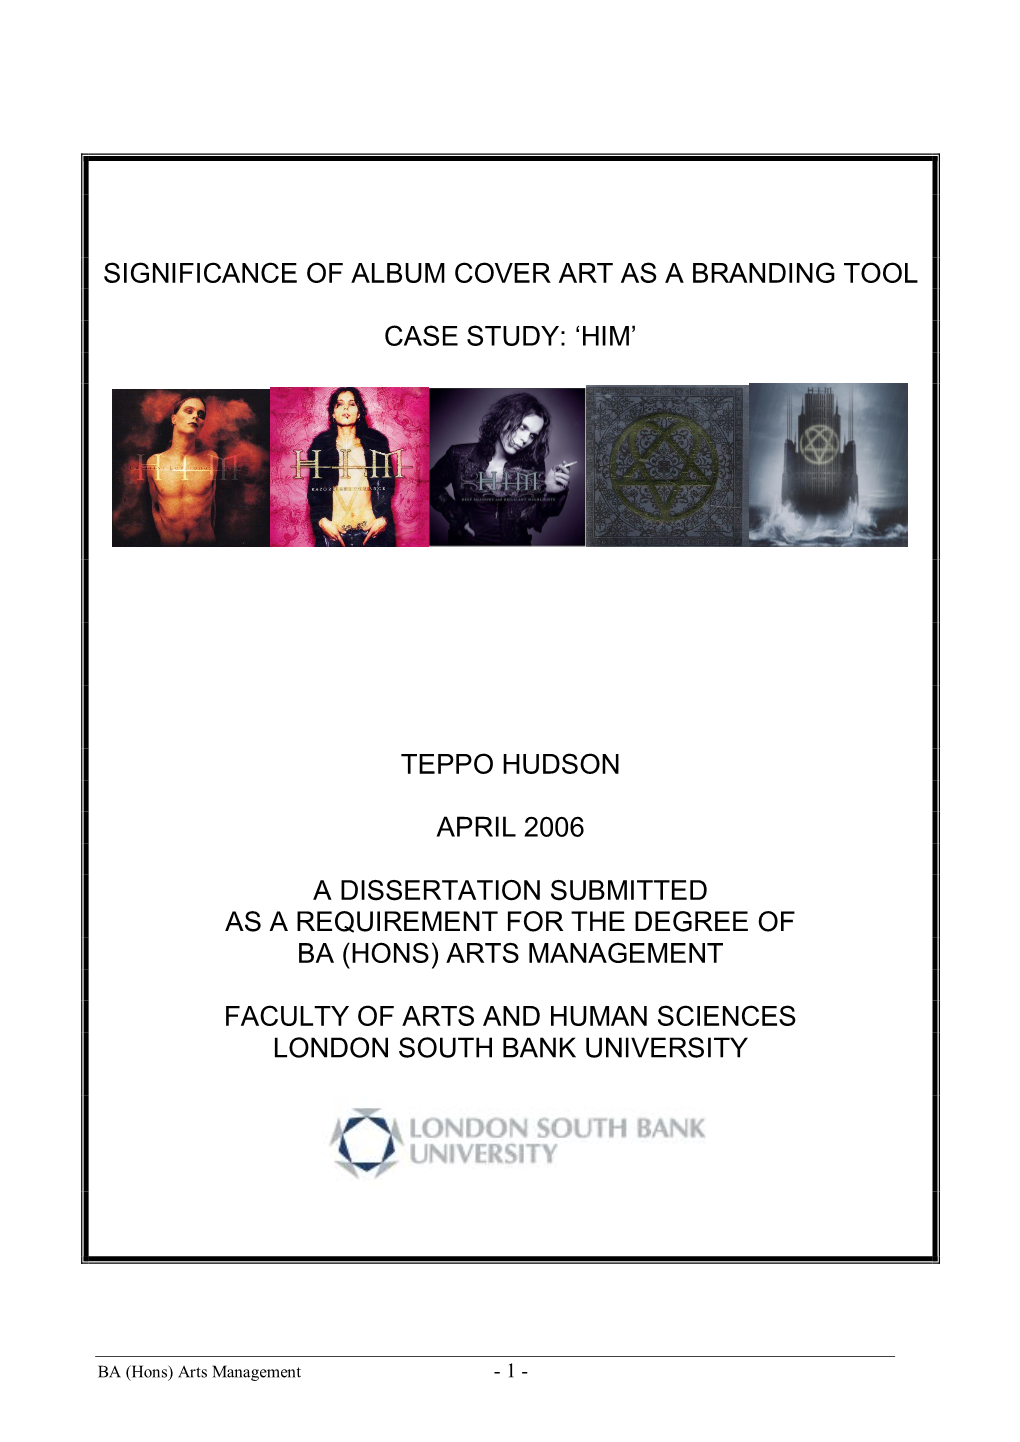 Significance of Album Cover Art As a Branding Tool